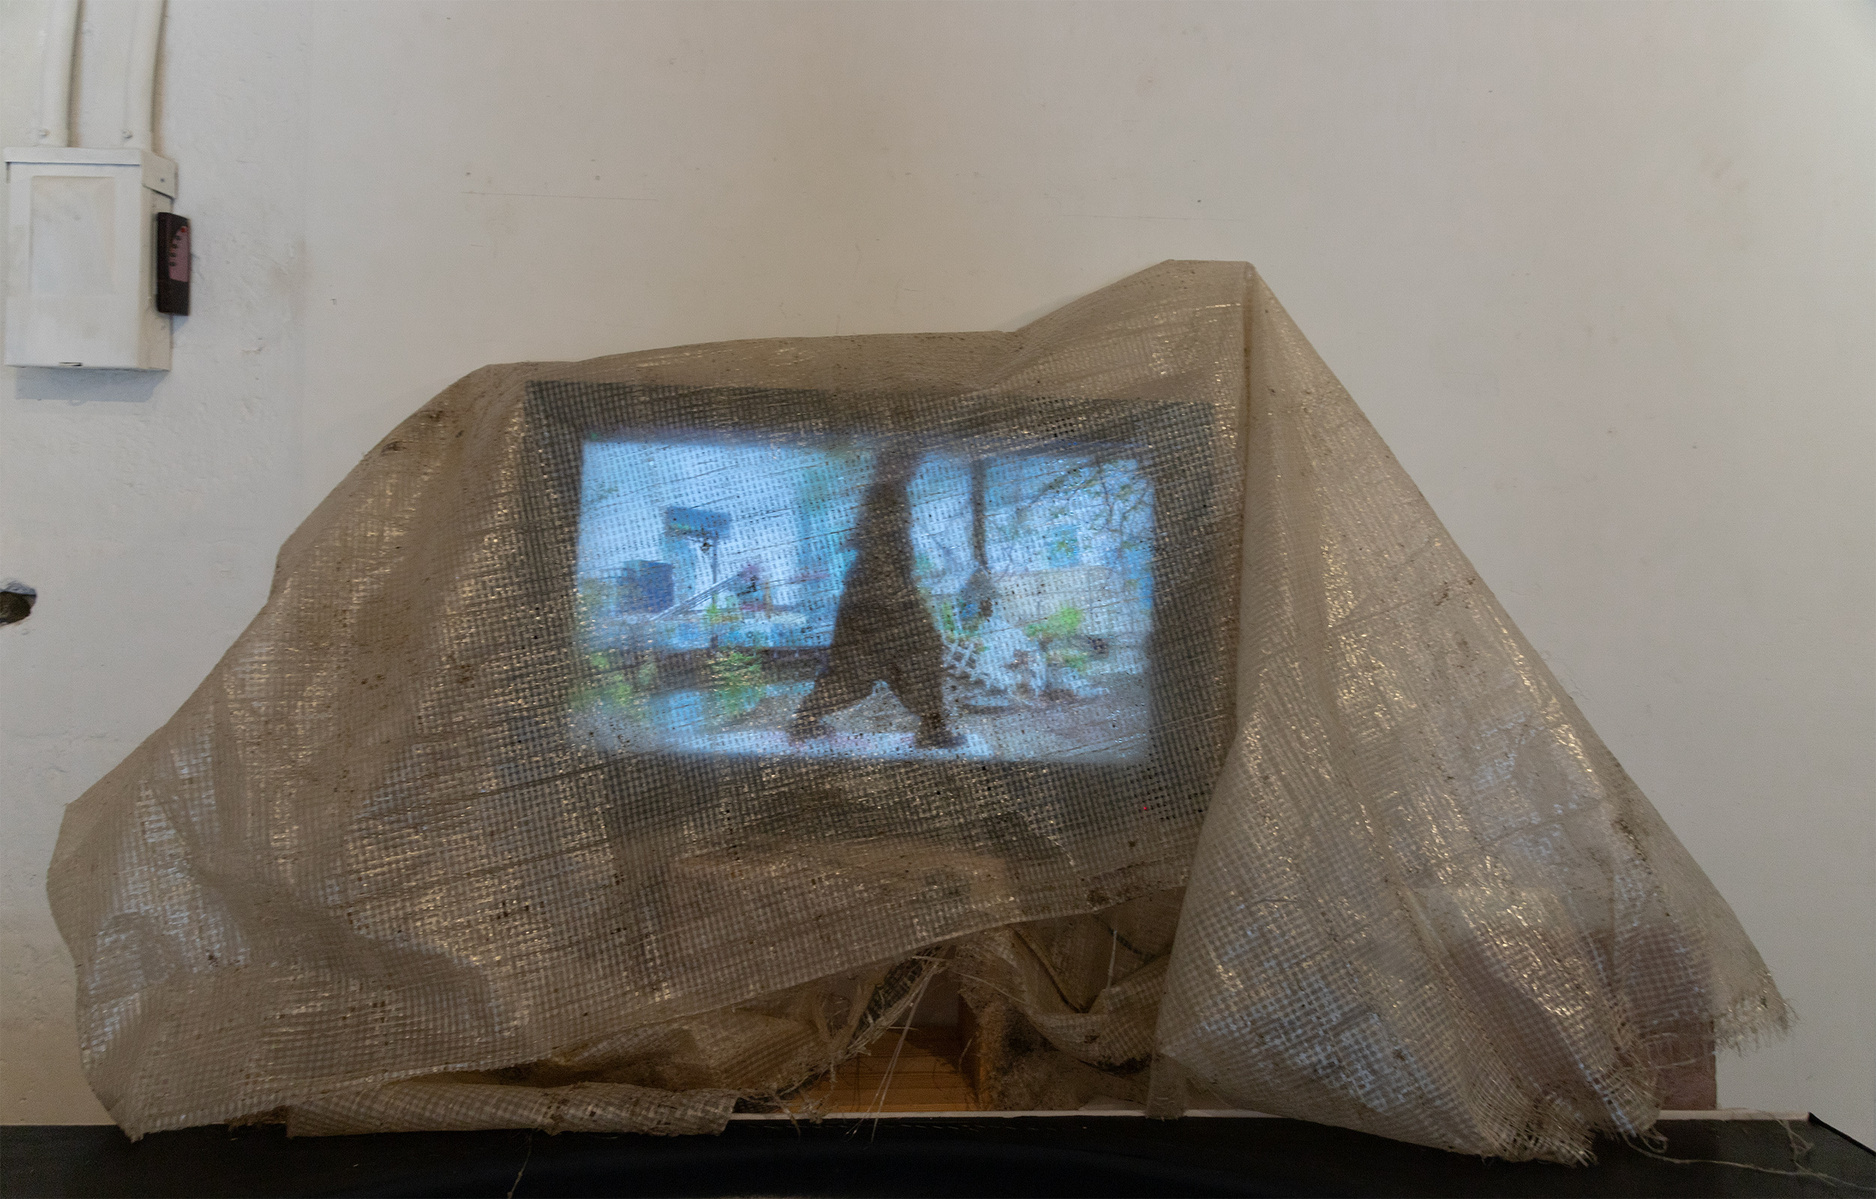 Works from Priscilla Stadler's art project SLUDGE created in response to  toxic Newtown Creek,  NYC, include the video "heal", featuring choreographer/dancer Chris Bisram. Monitor with video draped in weathered cloth found at the Creek.